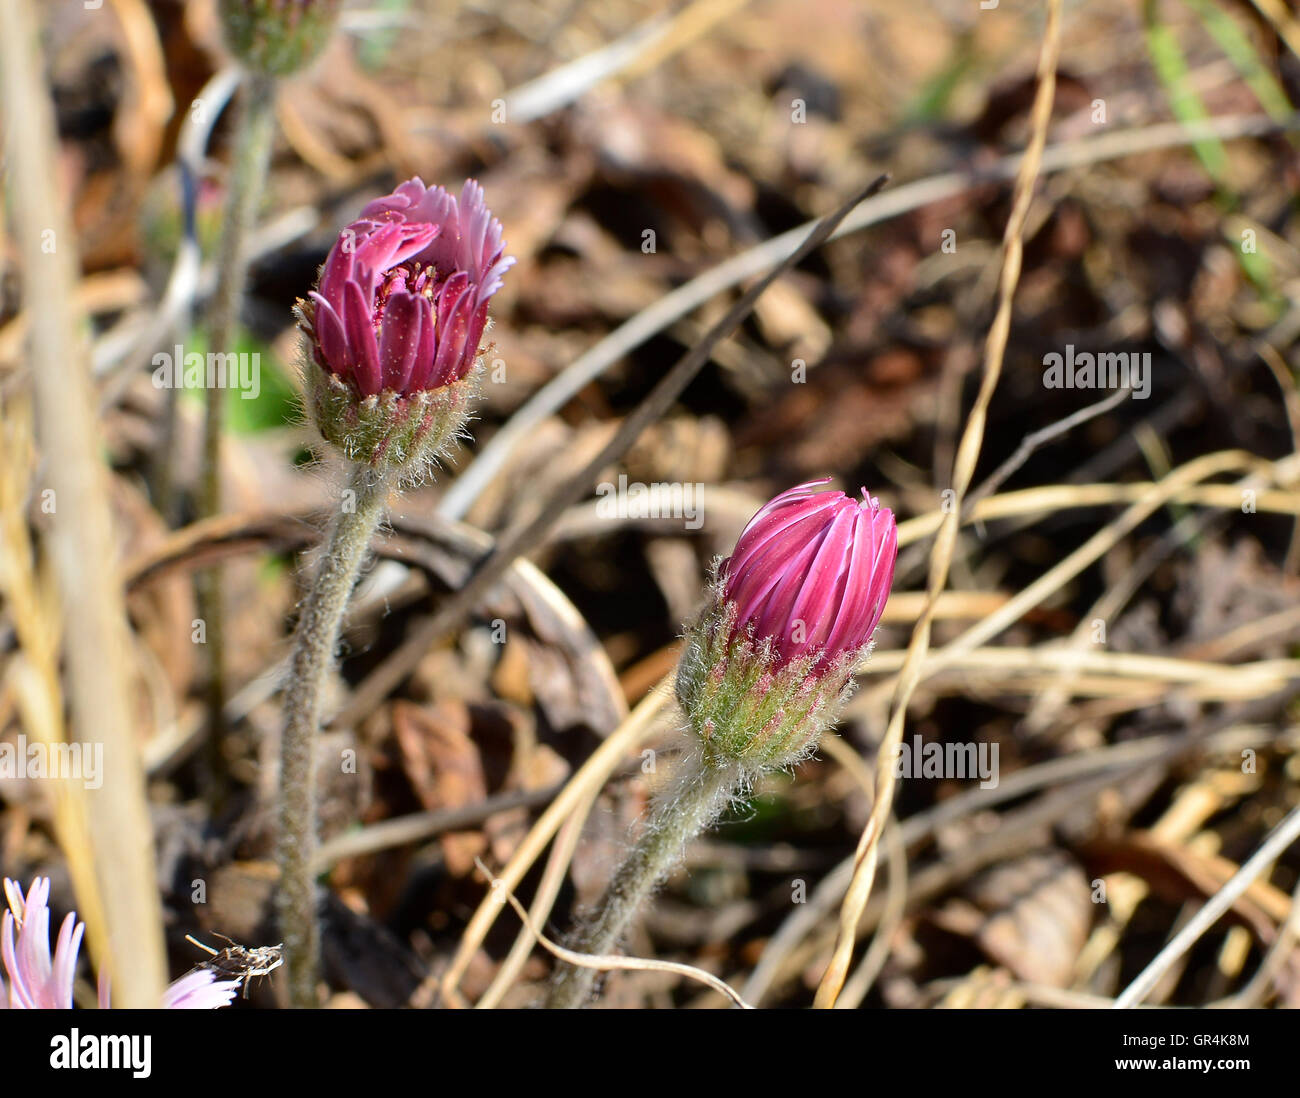 Pink wild flowers in spring before the rains with dry grass background in strong contrast. Stock Photo